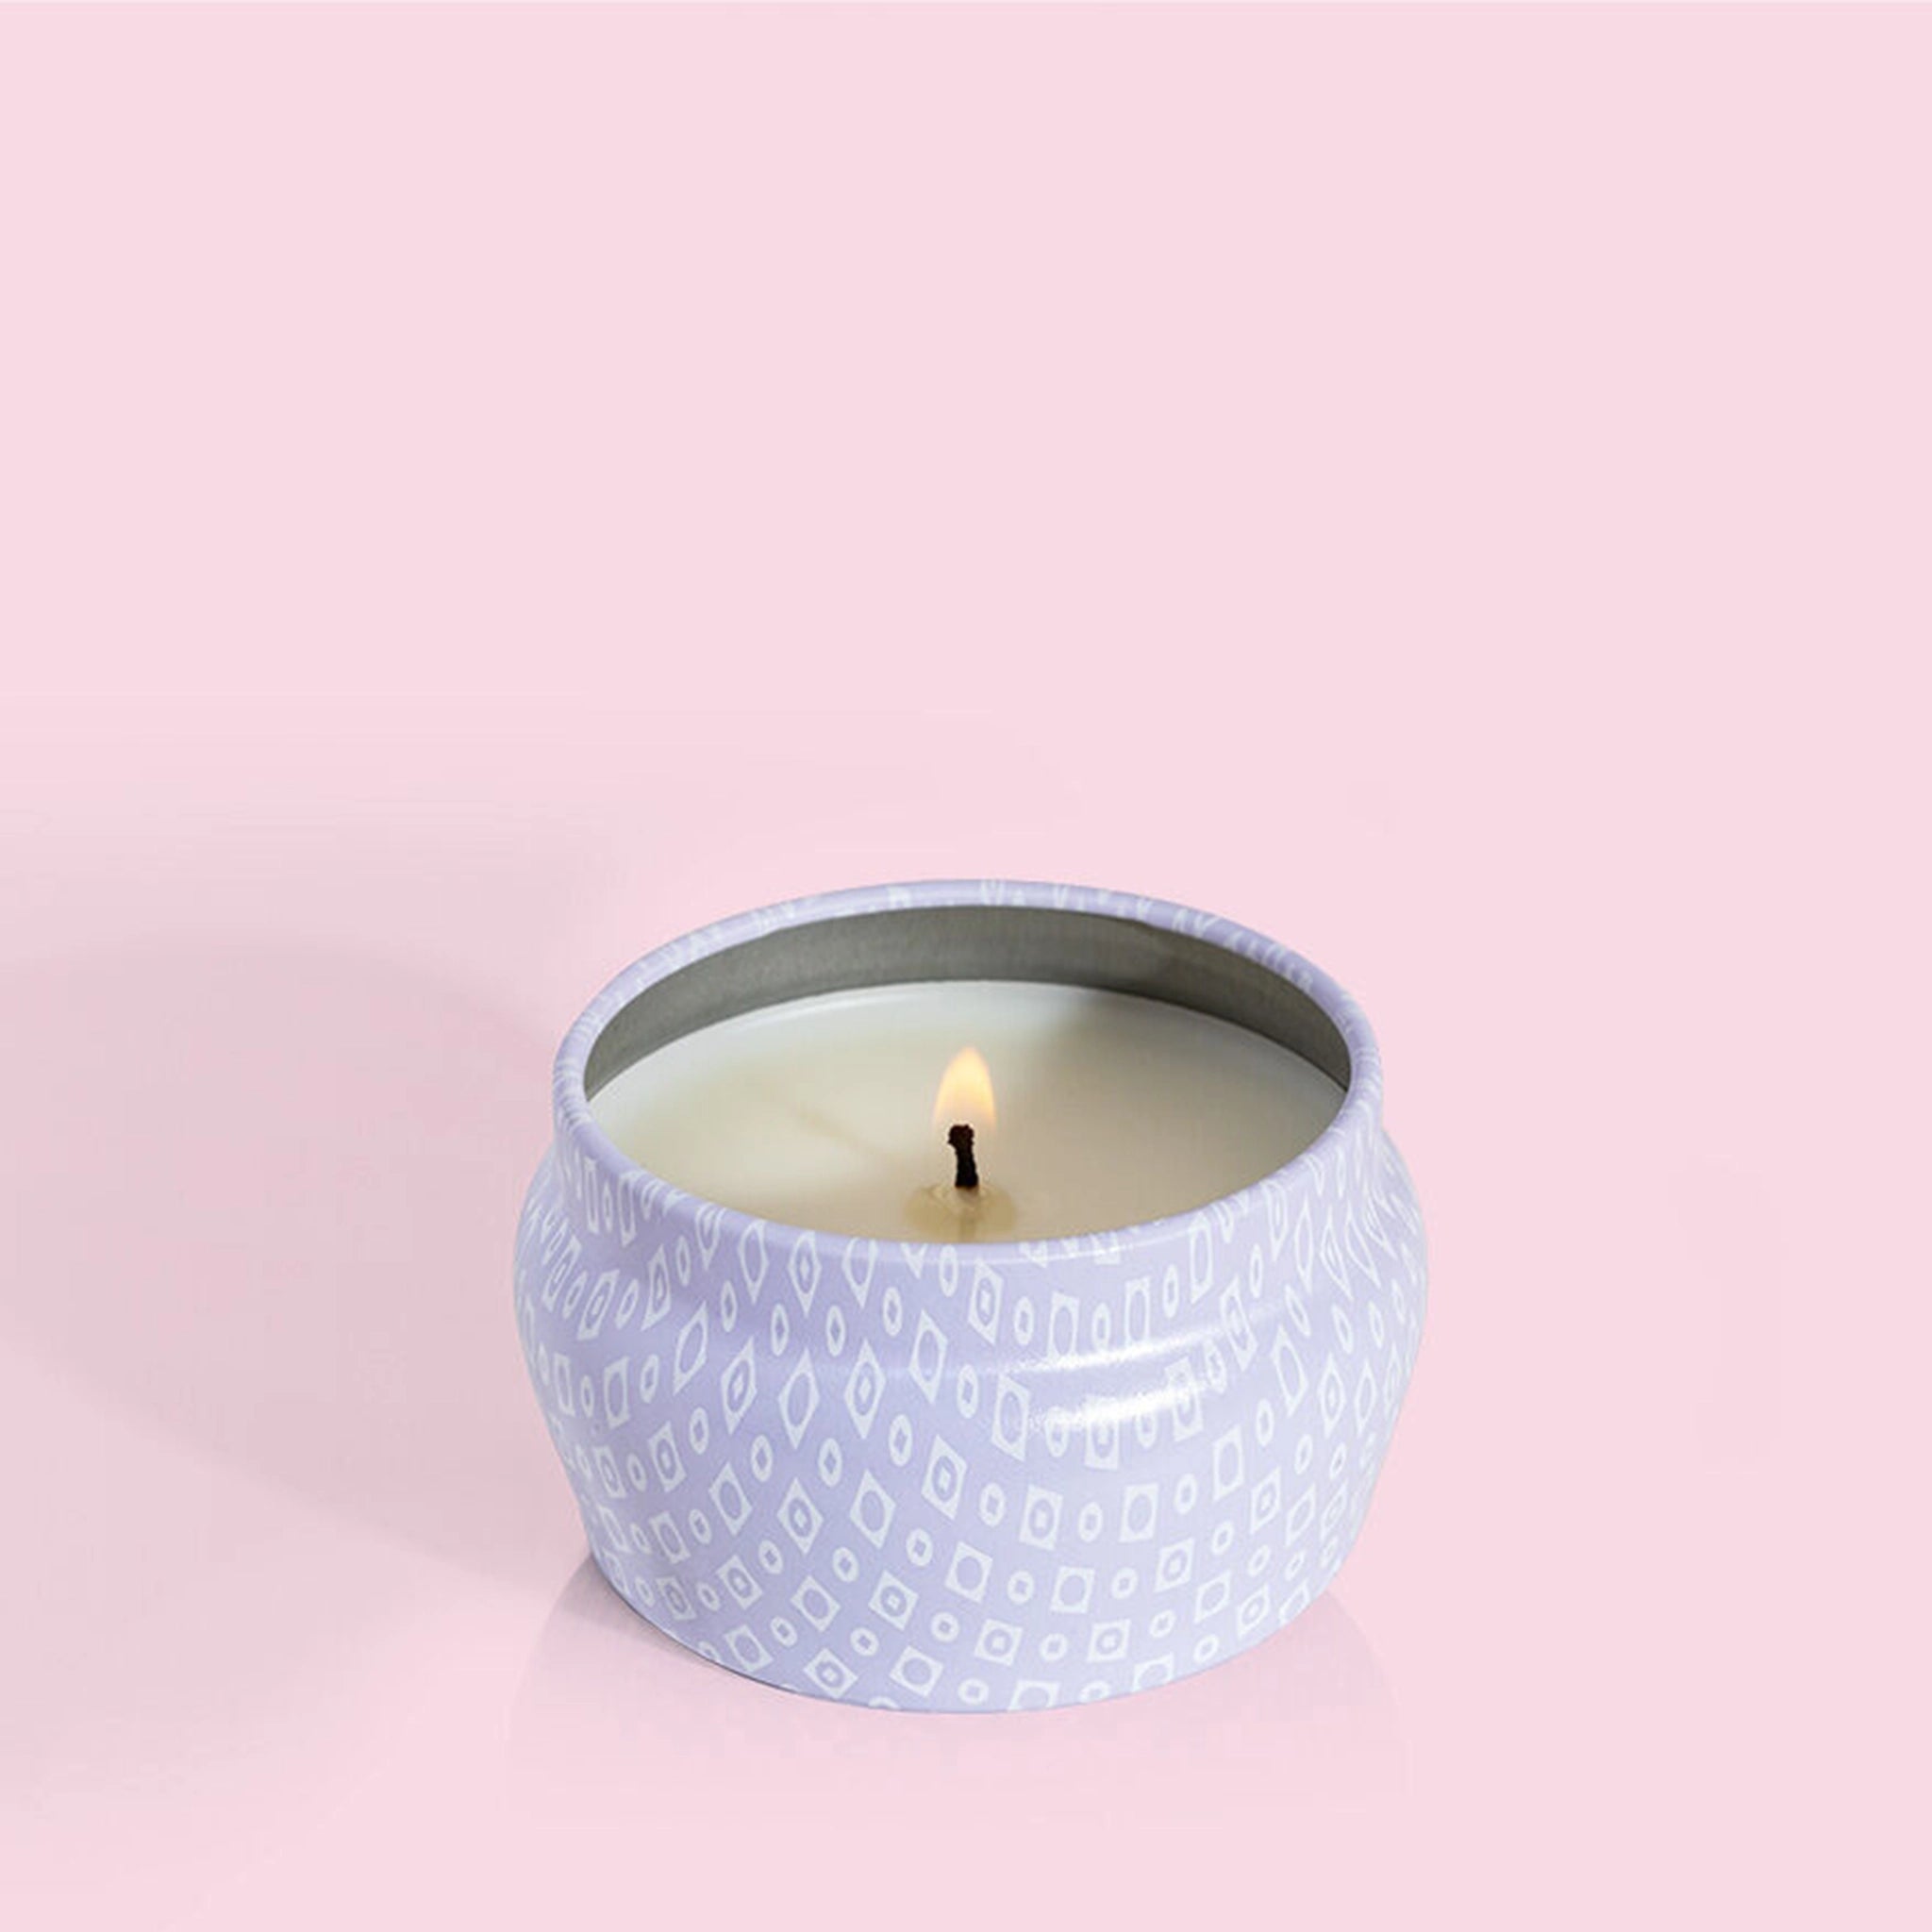 A small lavender tin candle with white wax and a white diamond repeating pattern on the outside of the tin. Comes with a matching purple lid that reads, "Capri Blue Volcano".